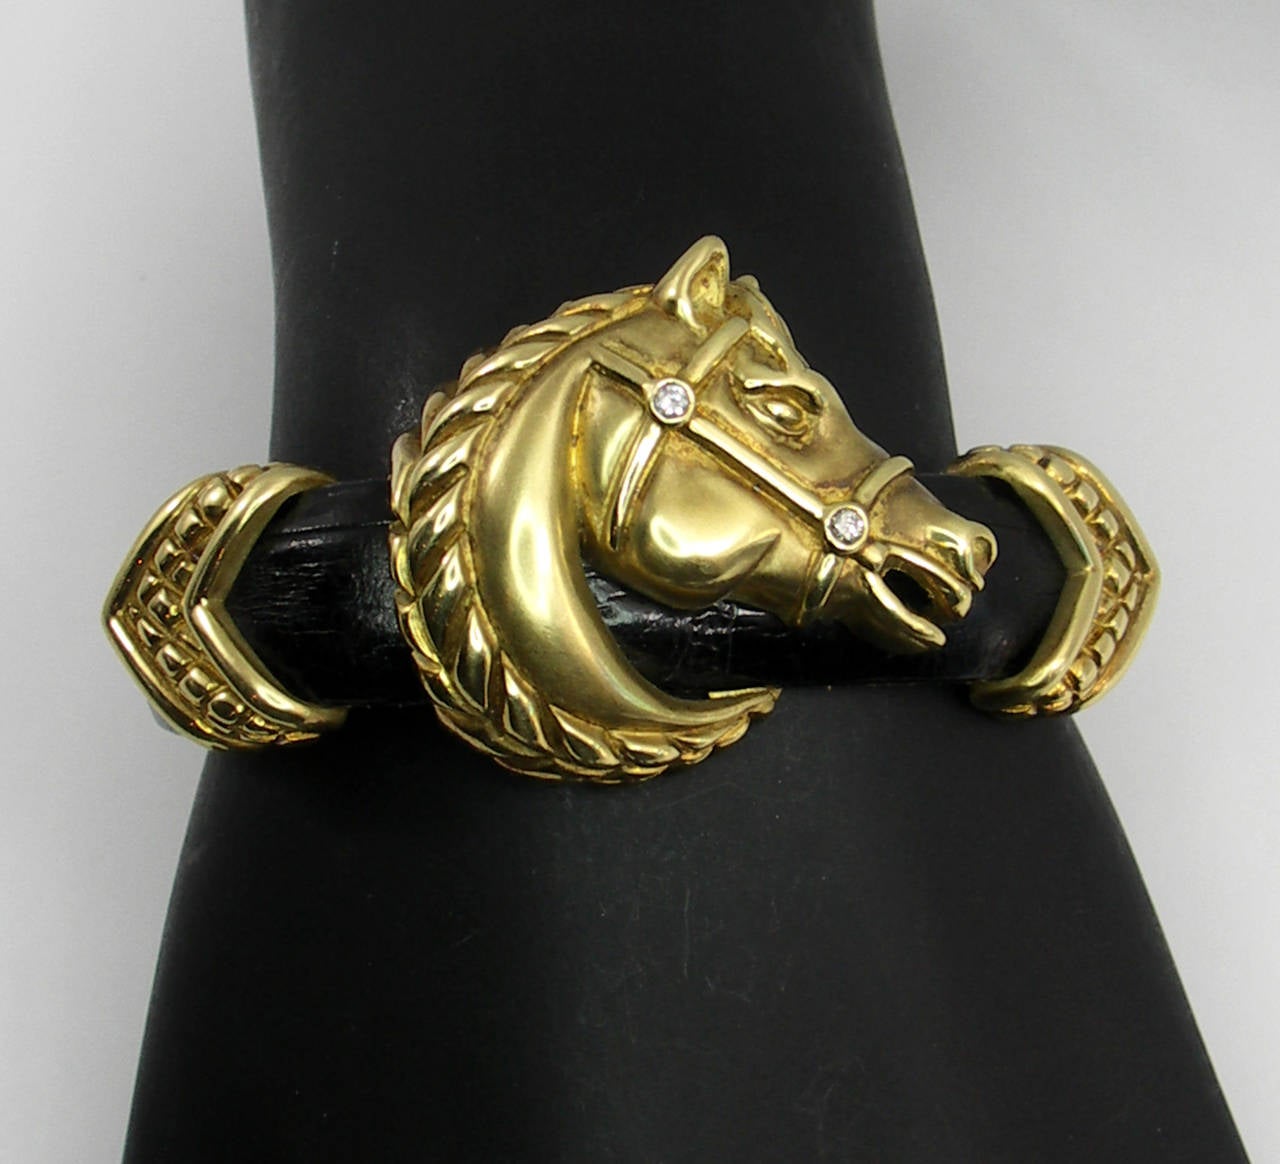 One ladies bracelet, comprised of a leather band, upon which 18K yellow gold motifs are attached. The center of the bracelet, is a satin finished horse's head, with high polished mane, and diamonds in the bridle. On either side of the horse are